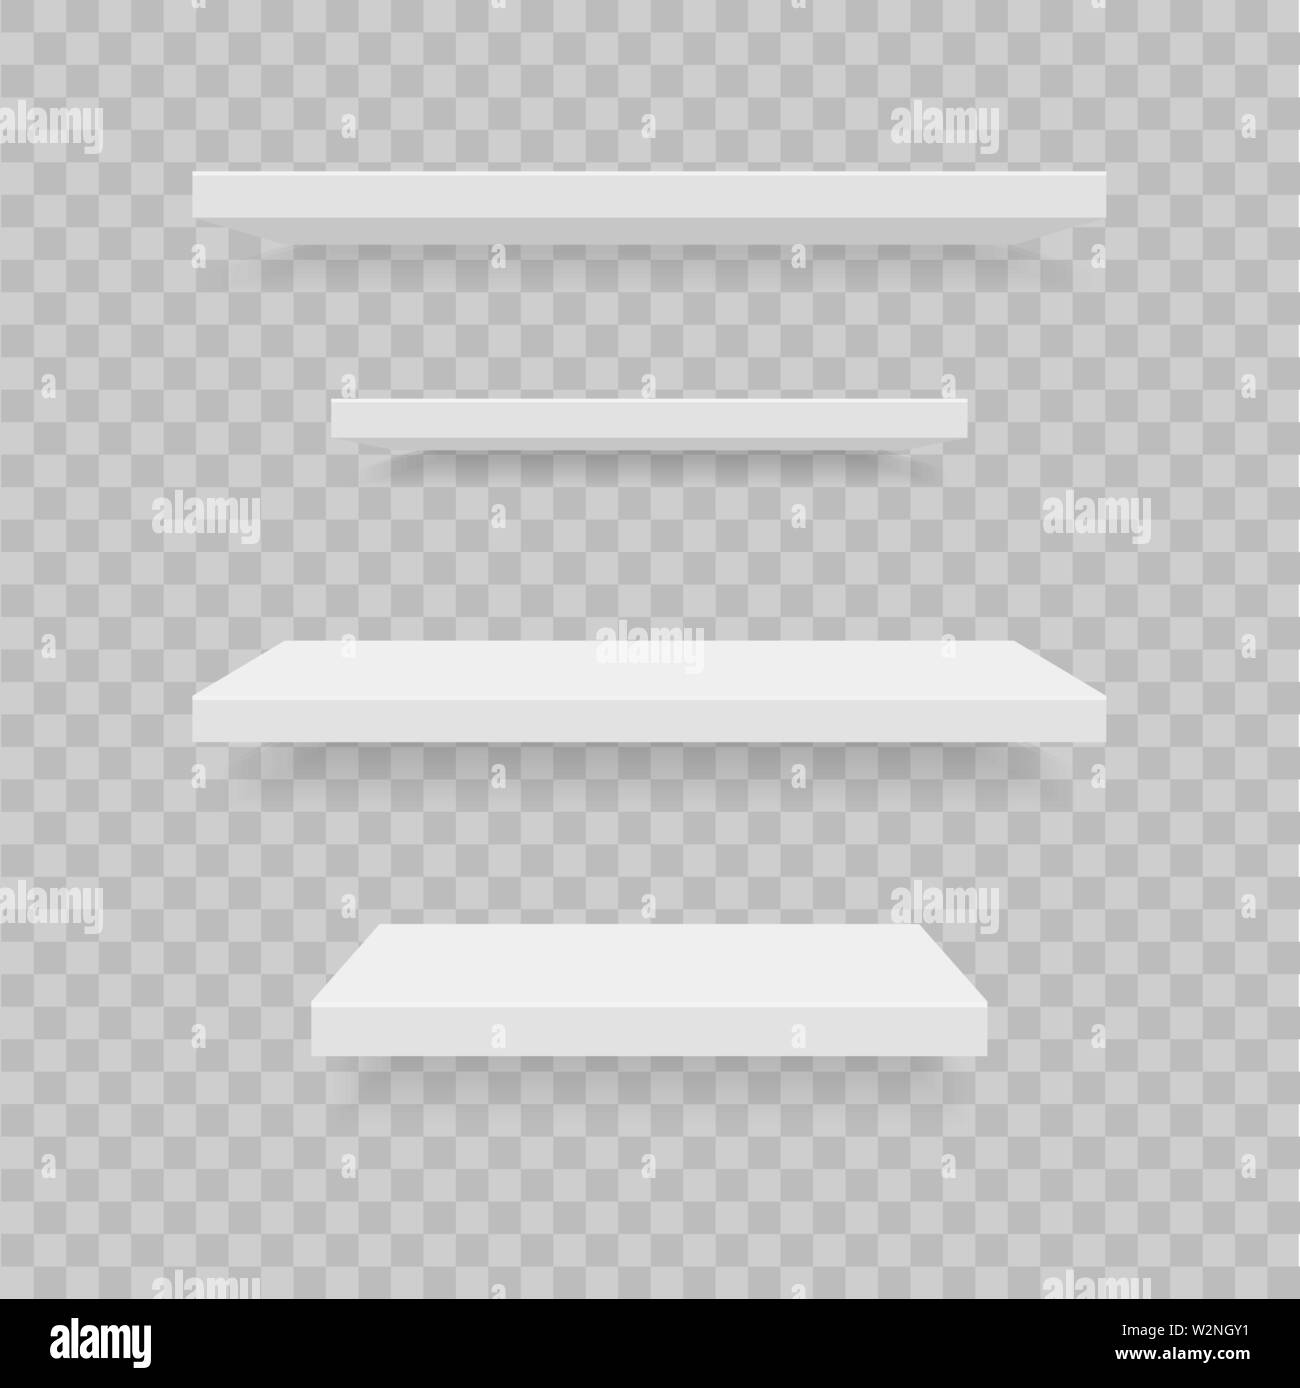 Realistic plastic shelves set isolated on grey back Stock Vector